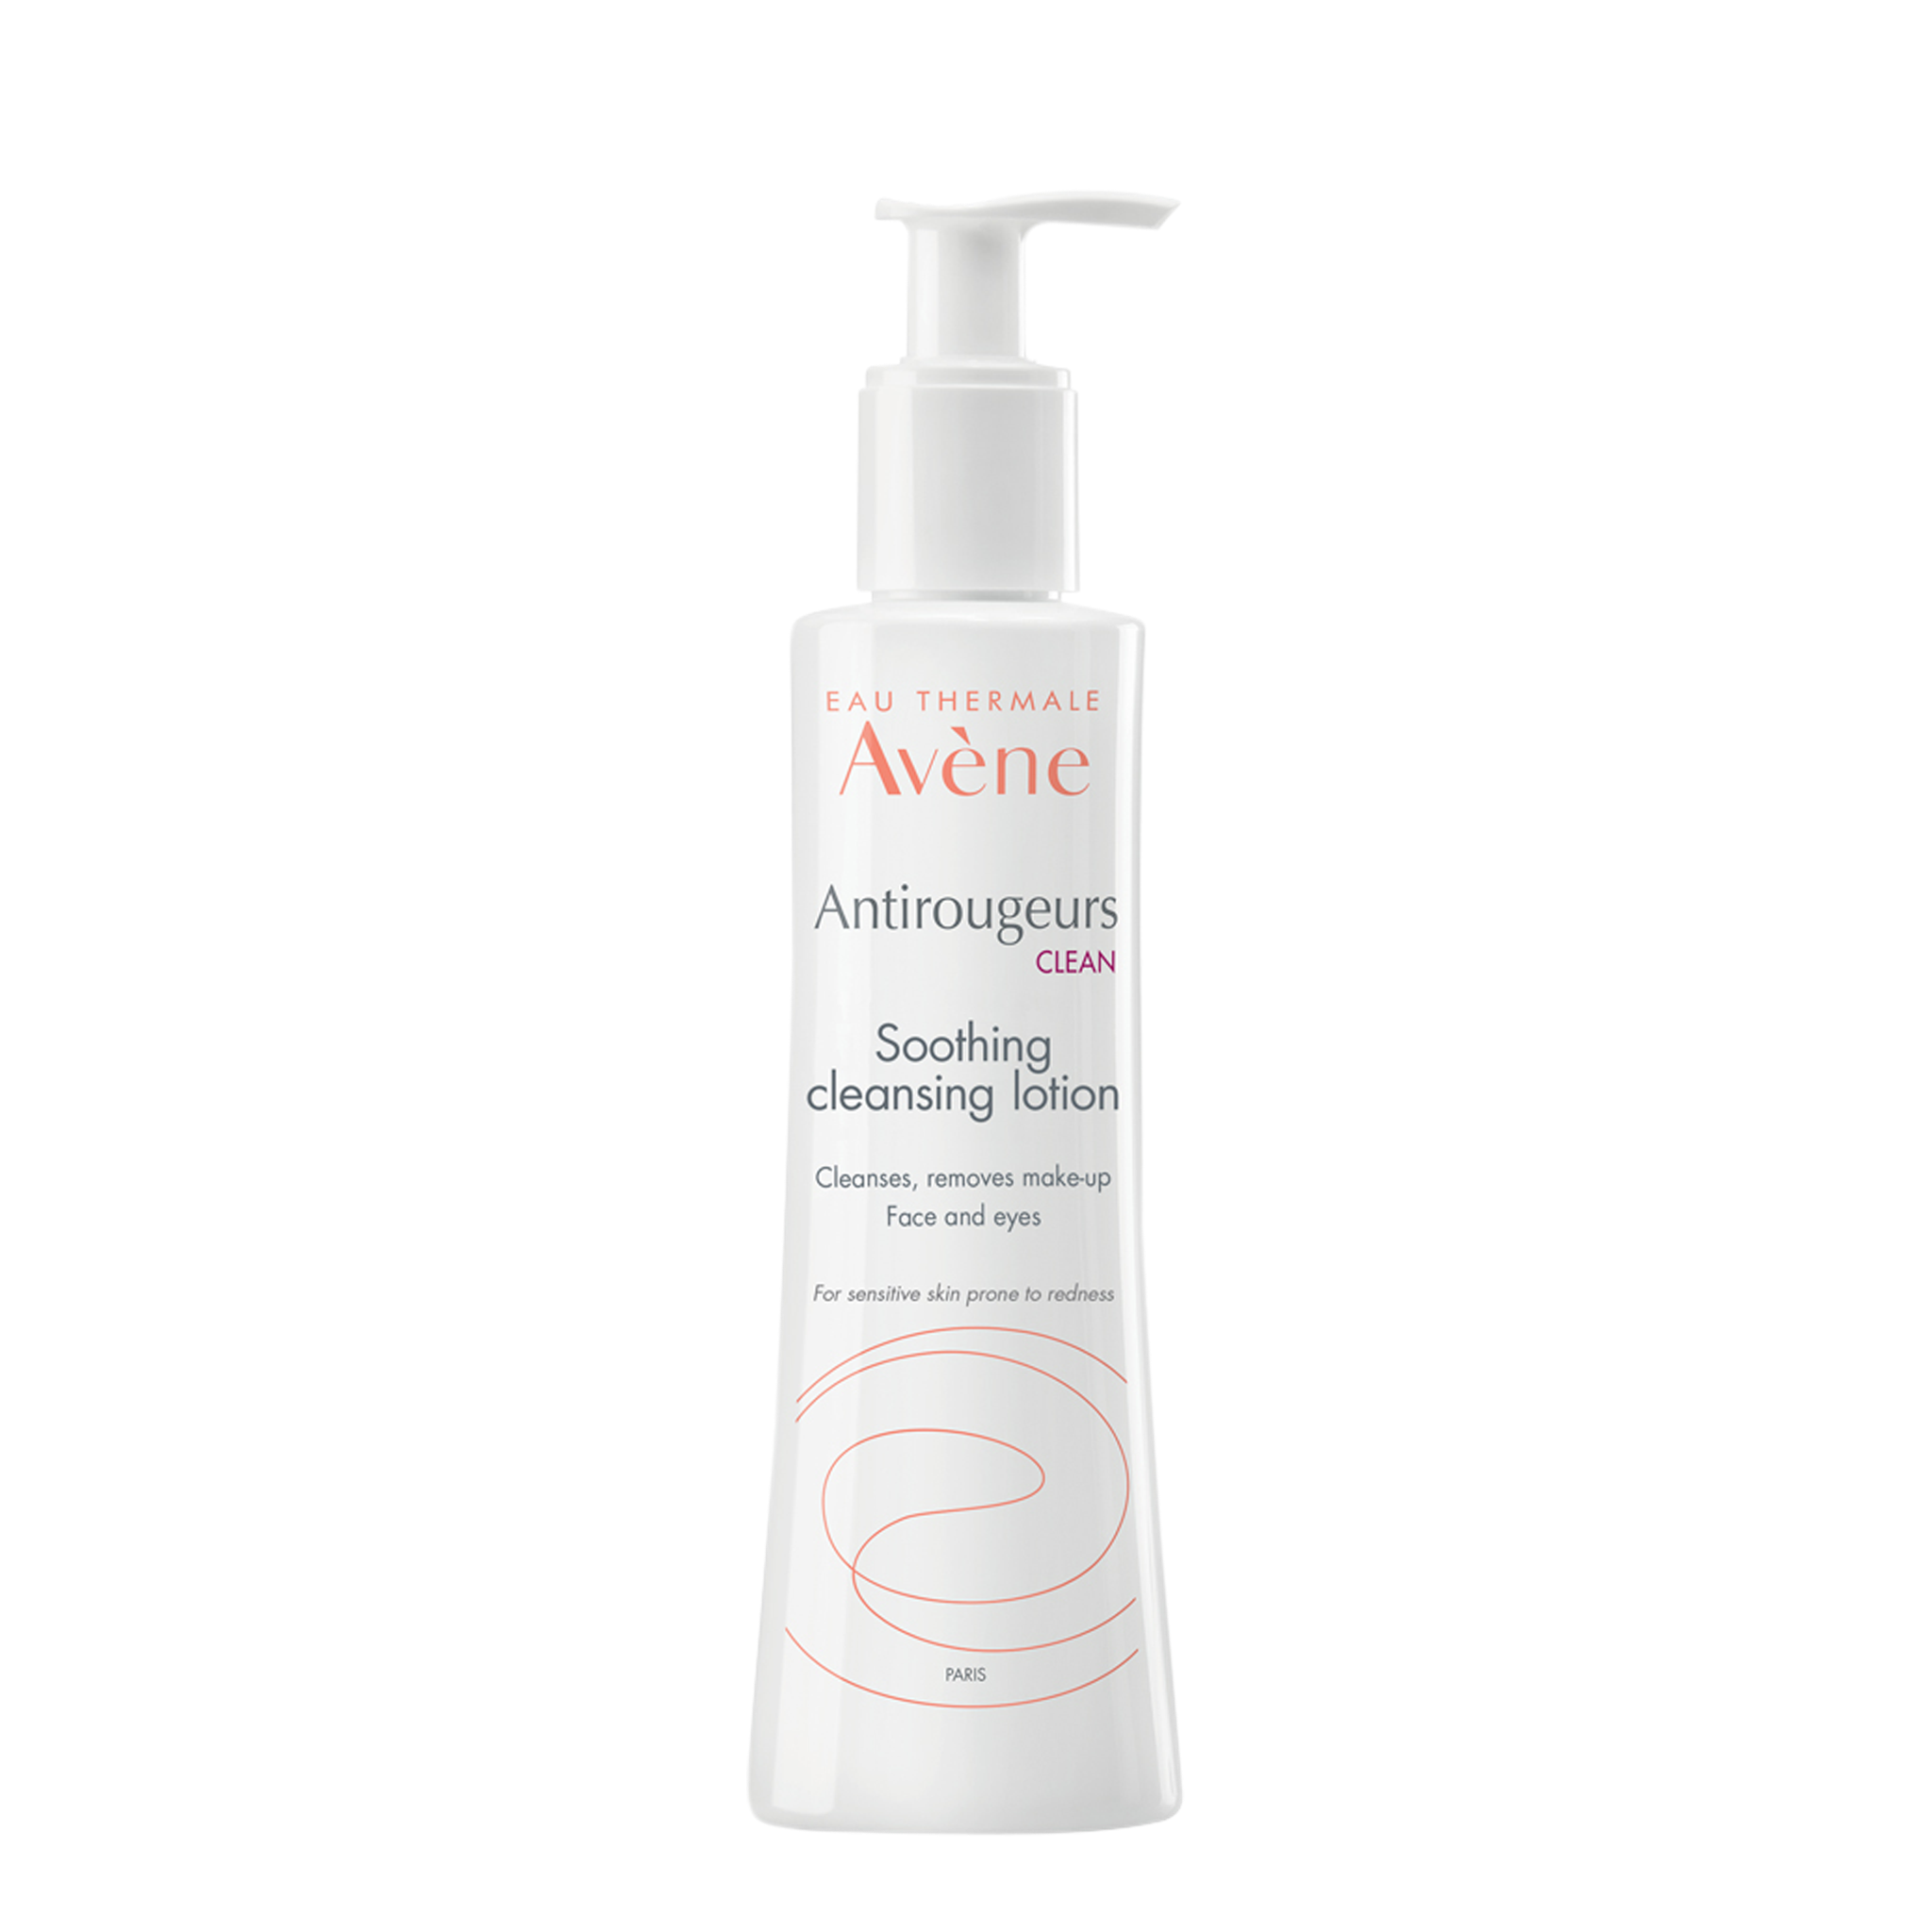 Avène Antirouguers CLEAN Soothing Cleansing Lotion 200ml - Cleanser for Redness-prone Skin